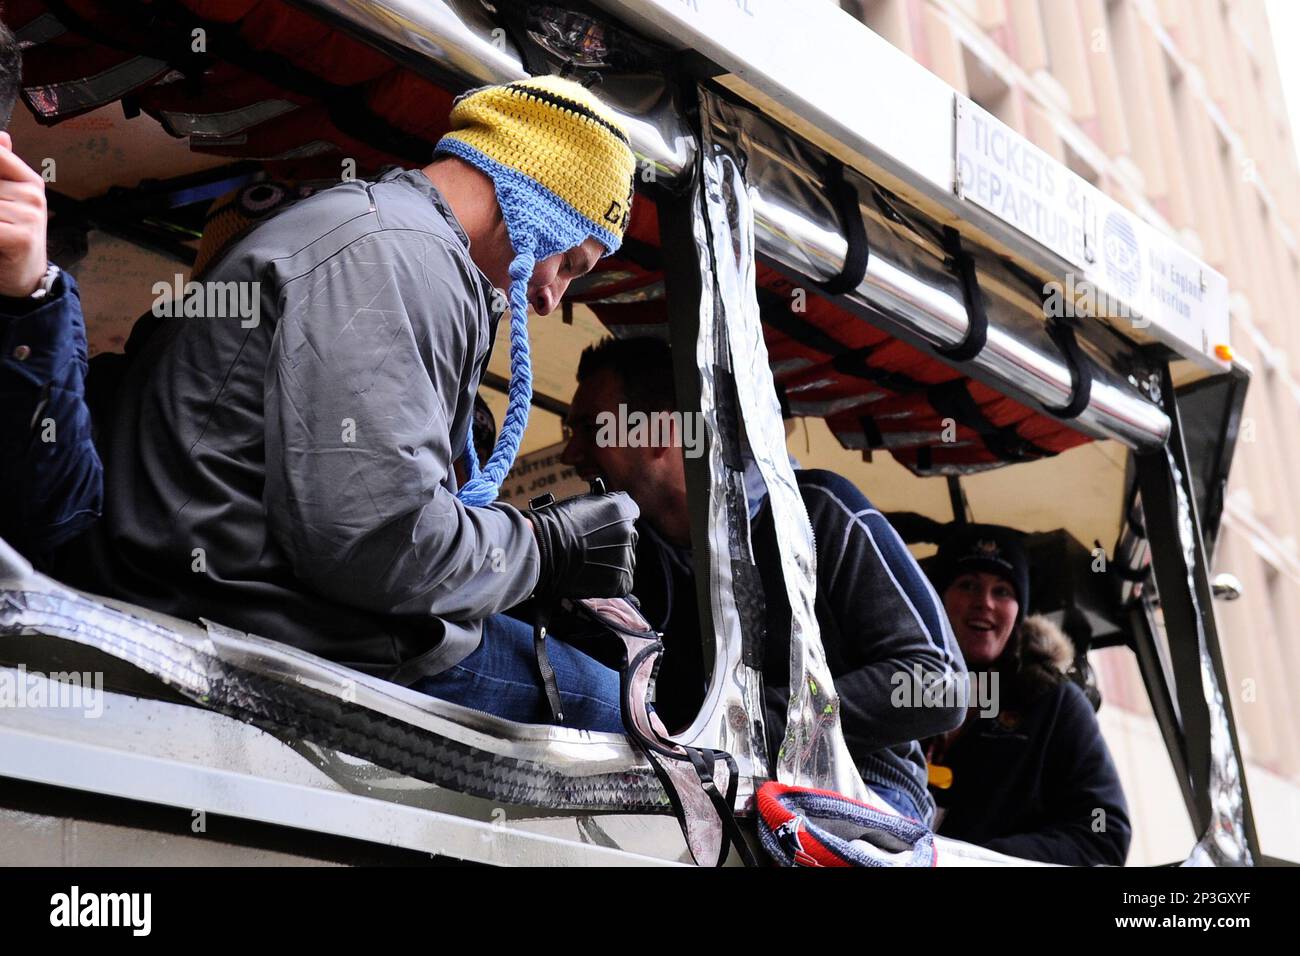 February 4, 2015 - Boston, Massachusetts, U.S. - New England Patriots tight  end Rob Gronkowski (87) autographs a bra given to him during a parade held  in Boston to celebrate the team's